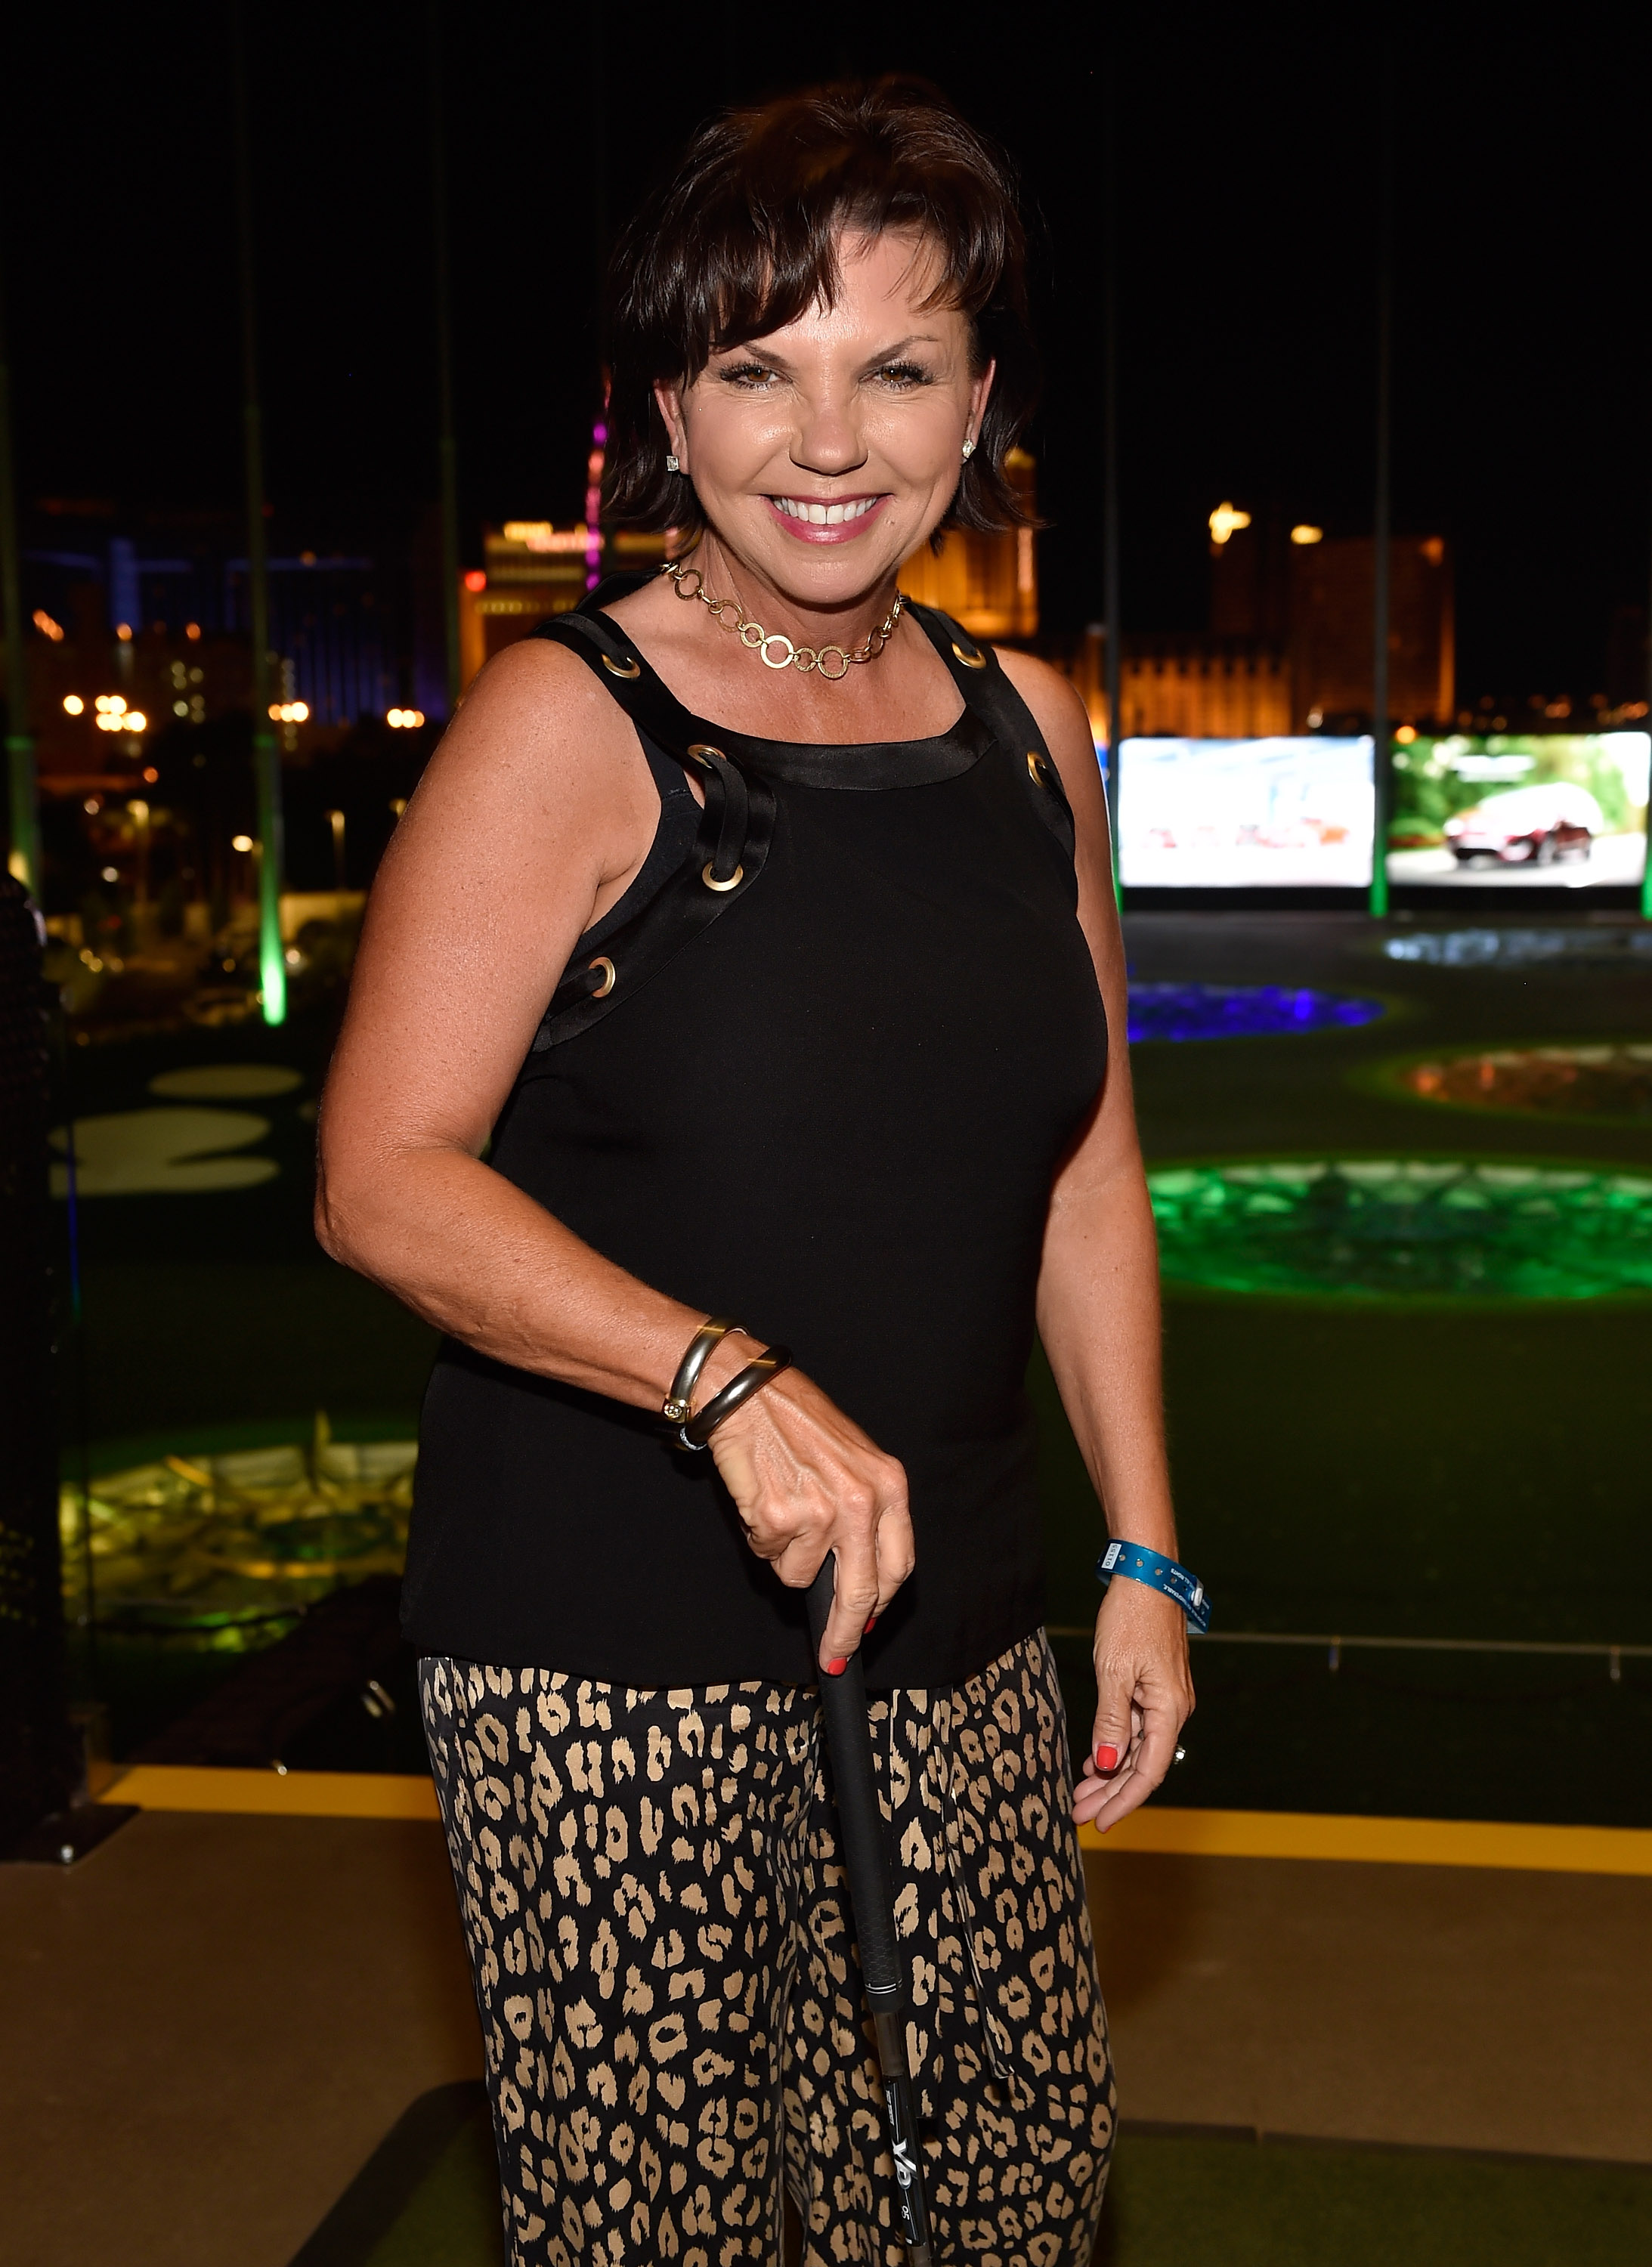 Tricia Lucus attends the debut of her SWINGDISH women's golf apparel 2017 spring/summer collection during the PGA show in Las Vegas, Nevada on August 16, 2016. | Source: Getty Images